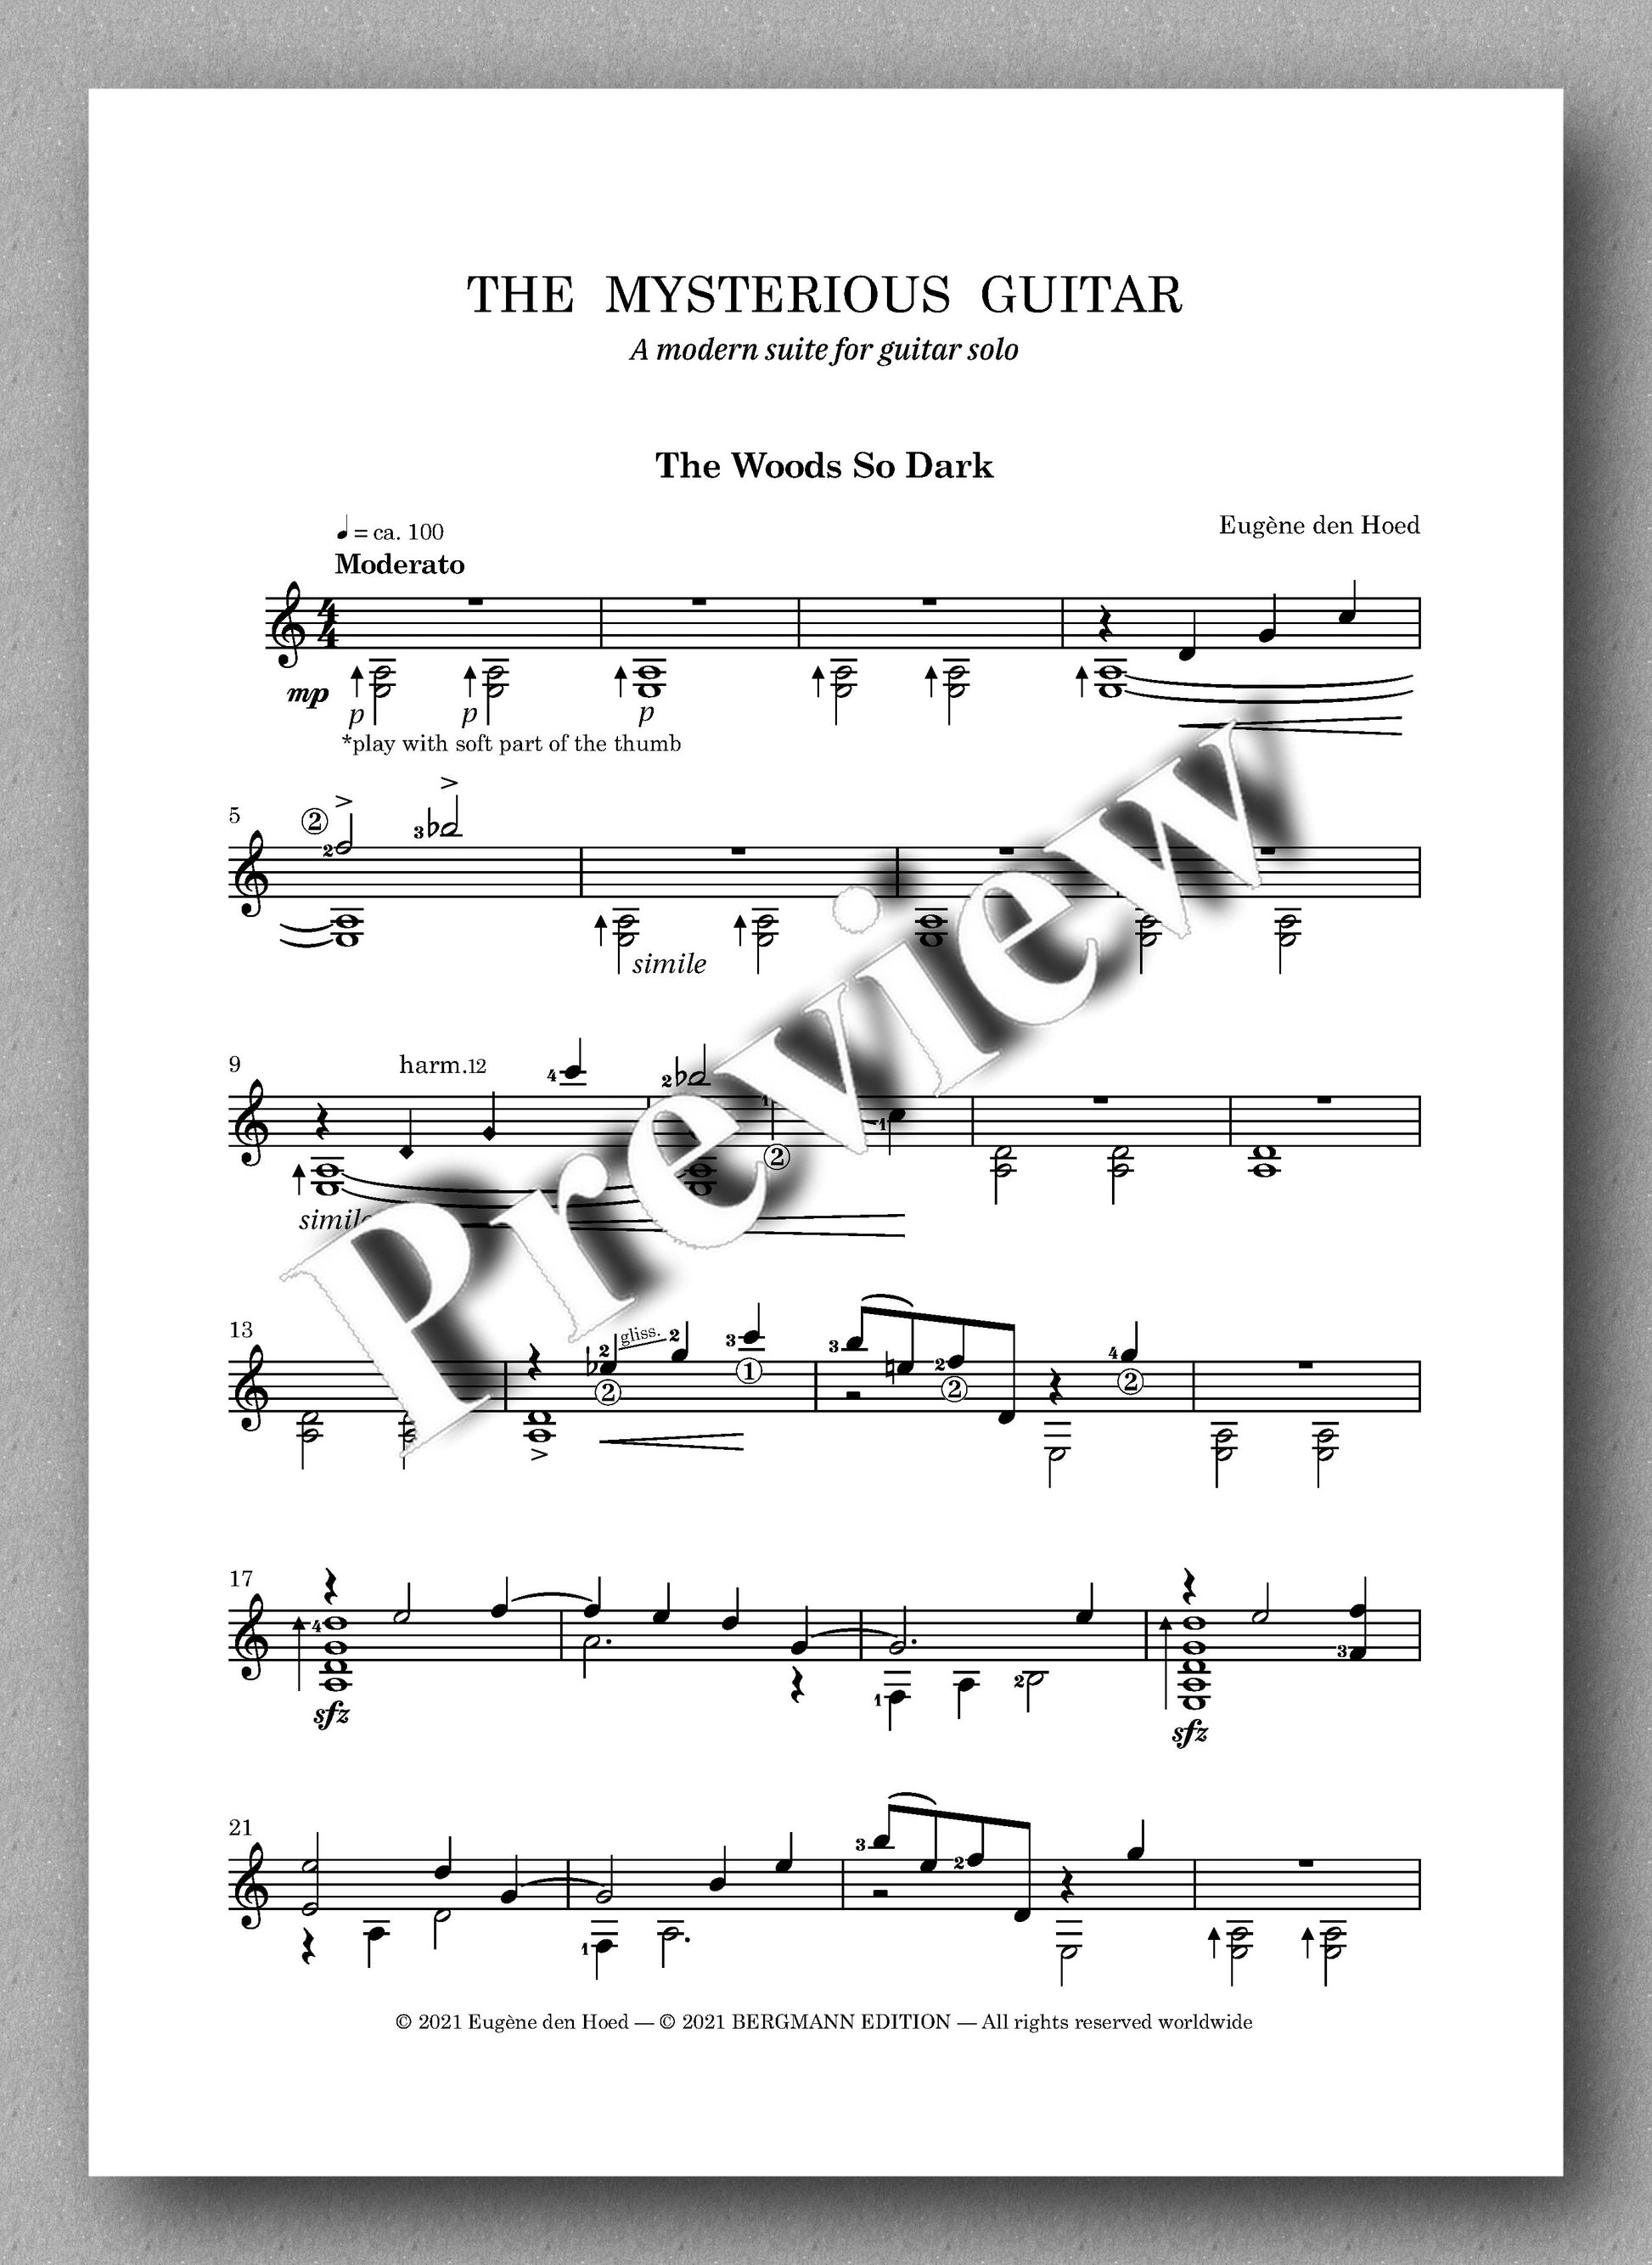 Hoed, The Mysterious Guitar - Music score 1